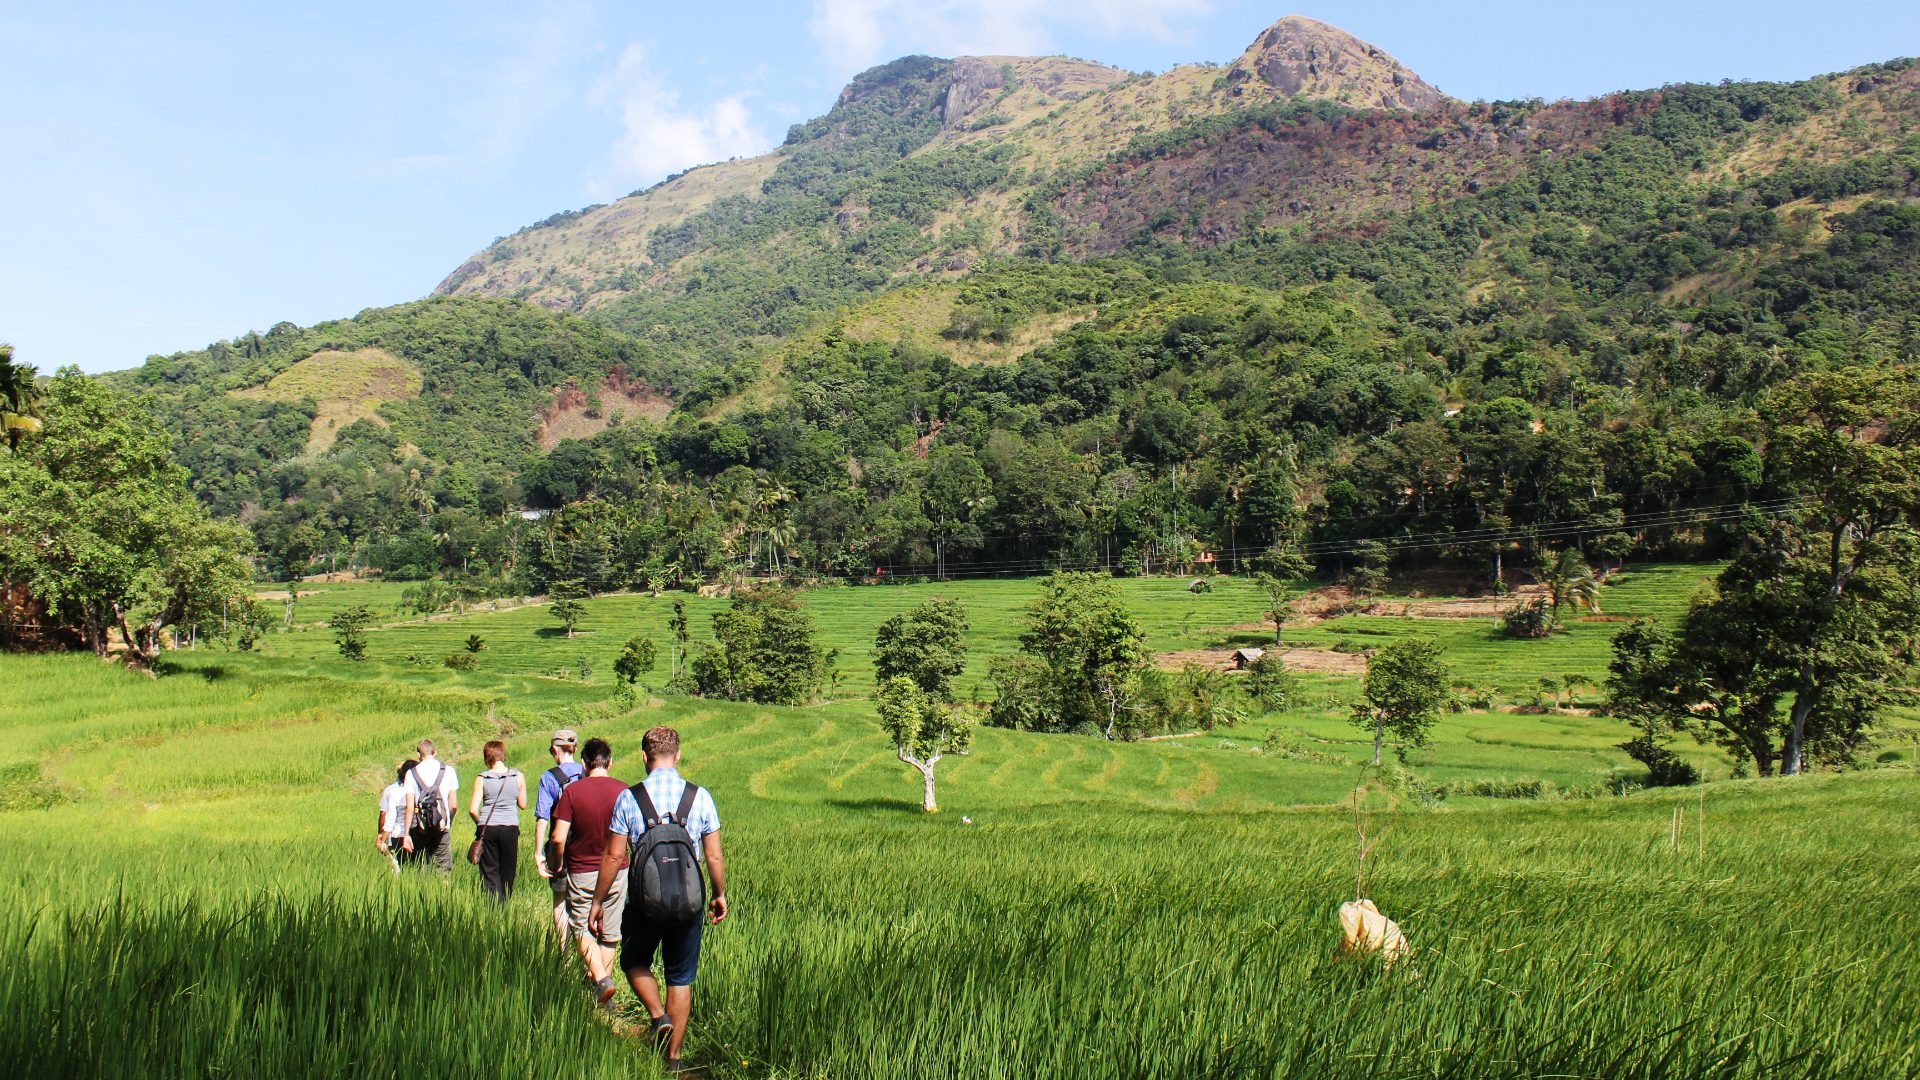 A group of people hiking through a lush landscape in Sri Lanka.